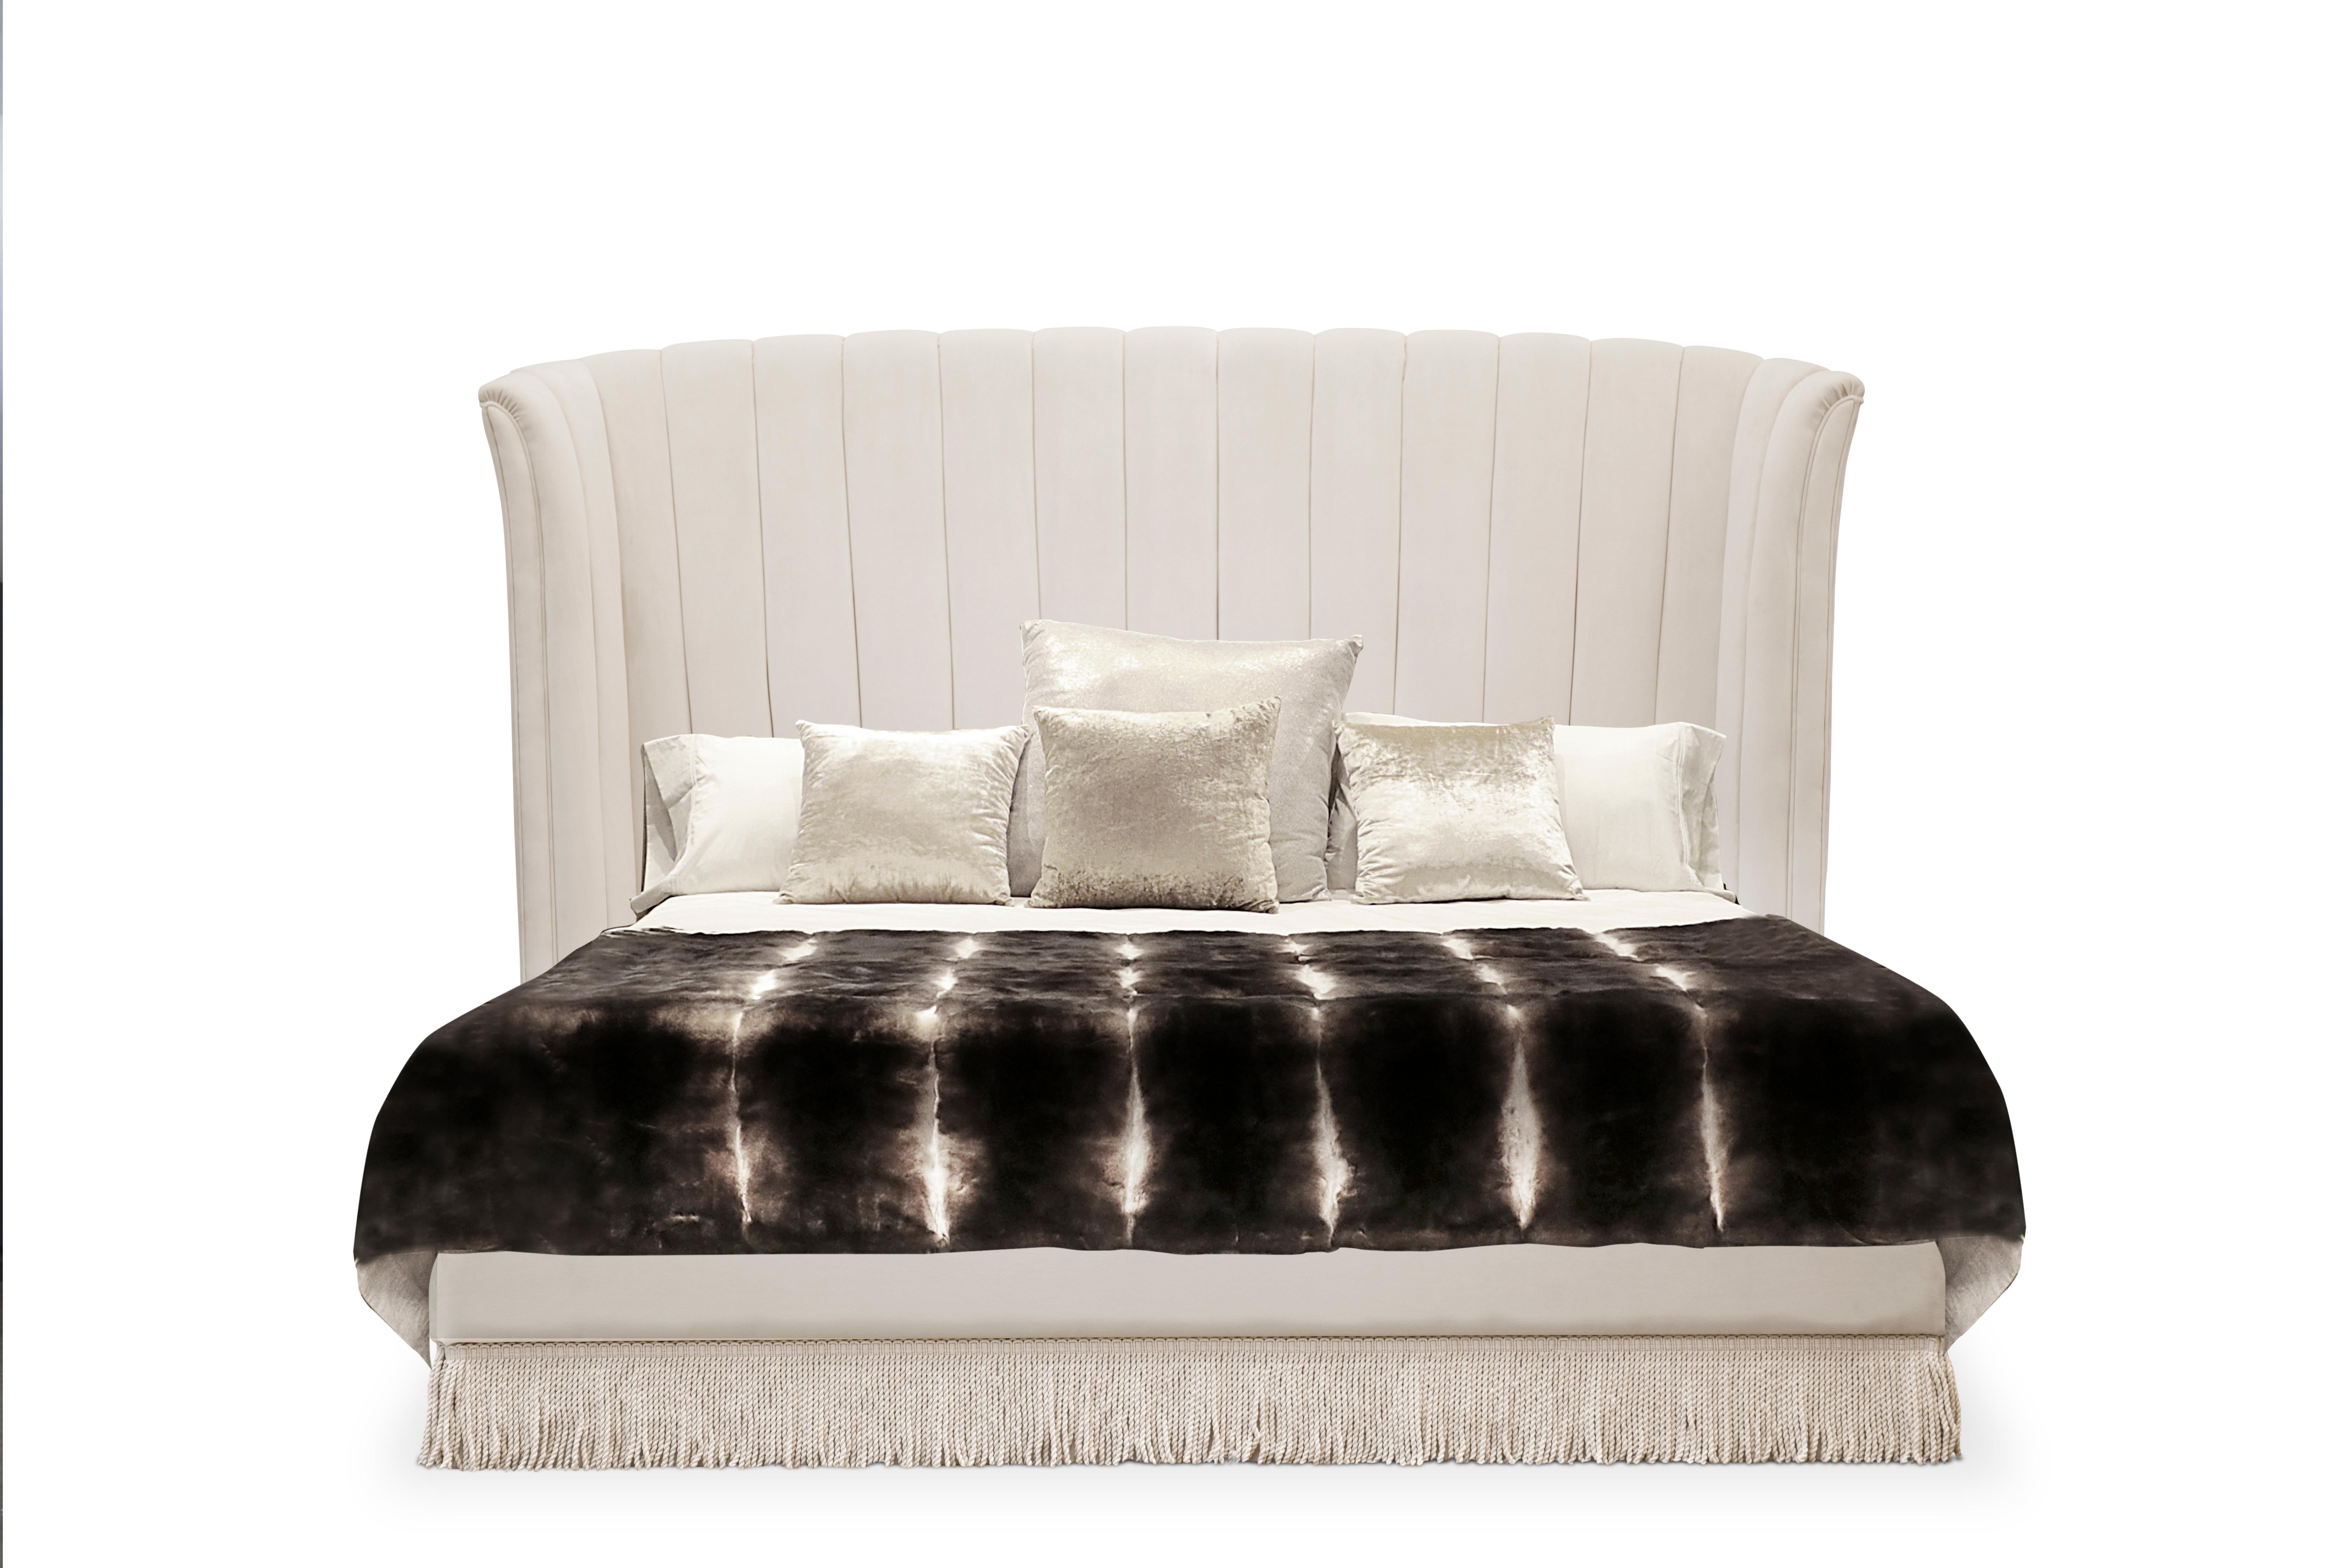 Inspired by wild, passionate nights of the Spanish dance, the Sevilliana bed design embodies the graceful curves and attire of Sevillana dancing girls. Become entranced in the movement of modern lines drawing your eye down to the flirtatious fringe